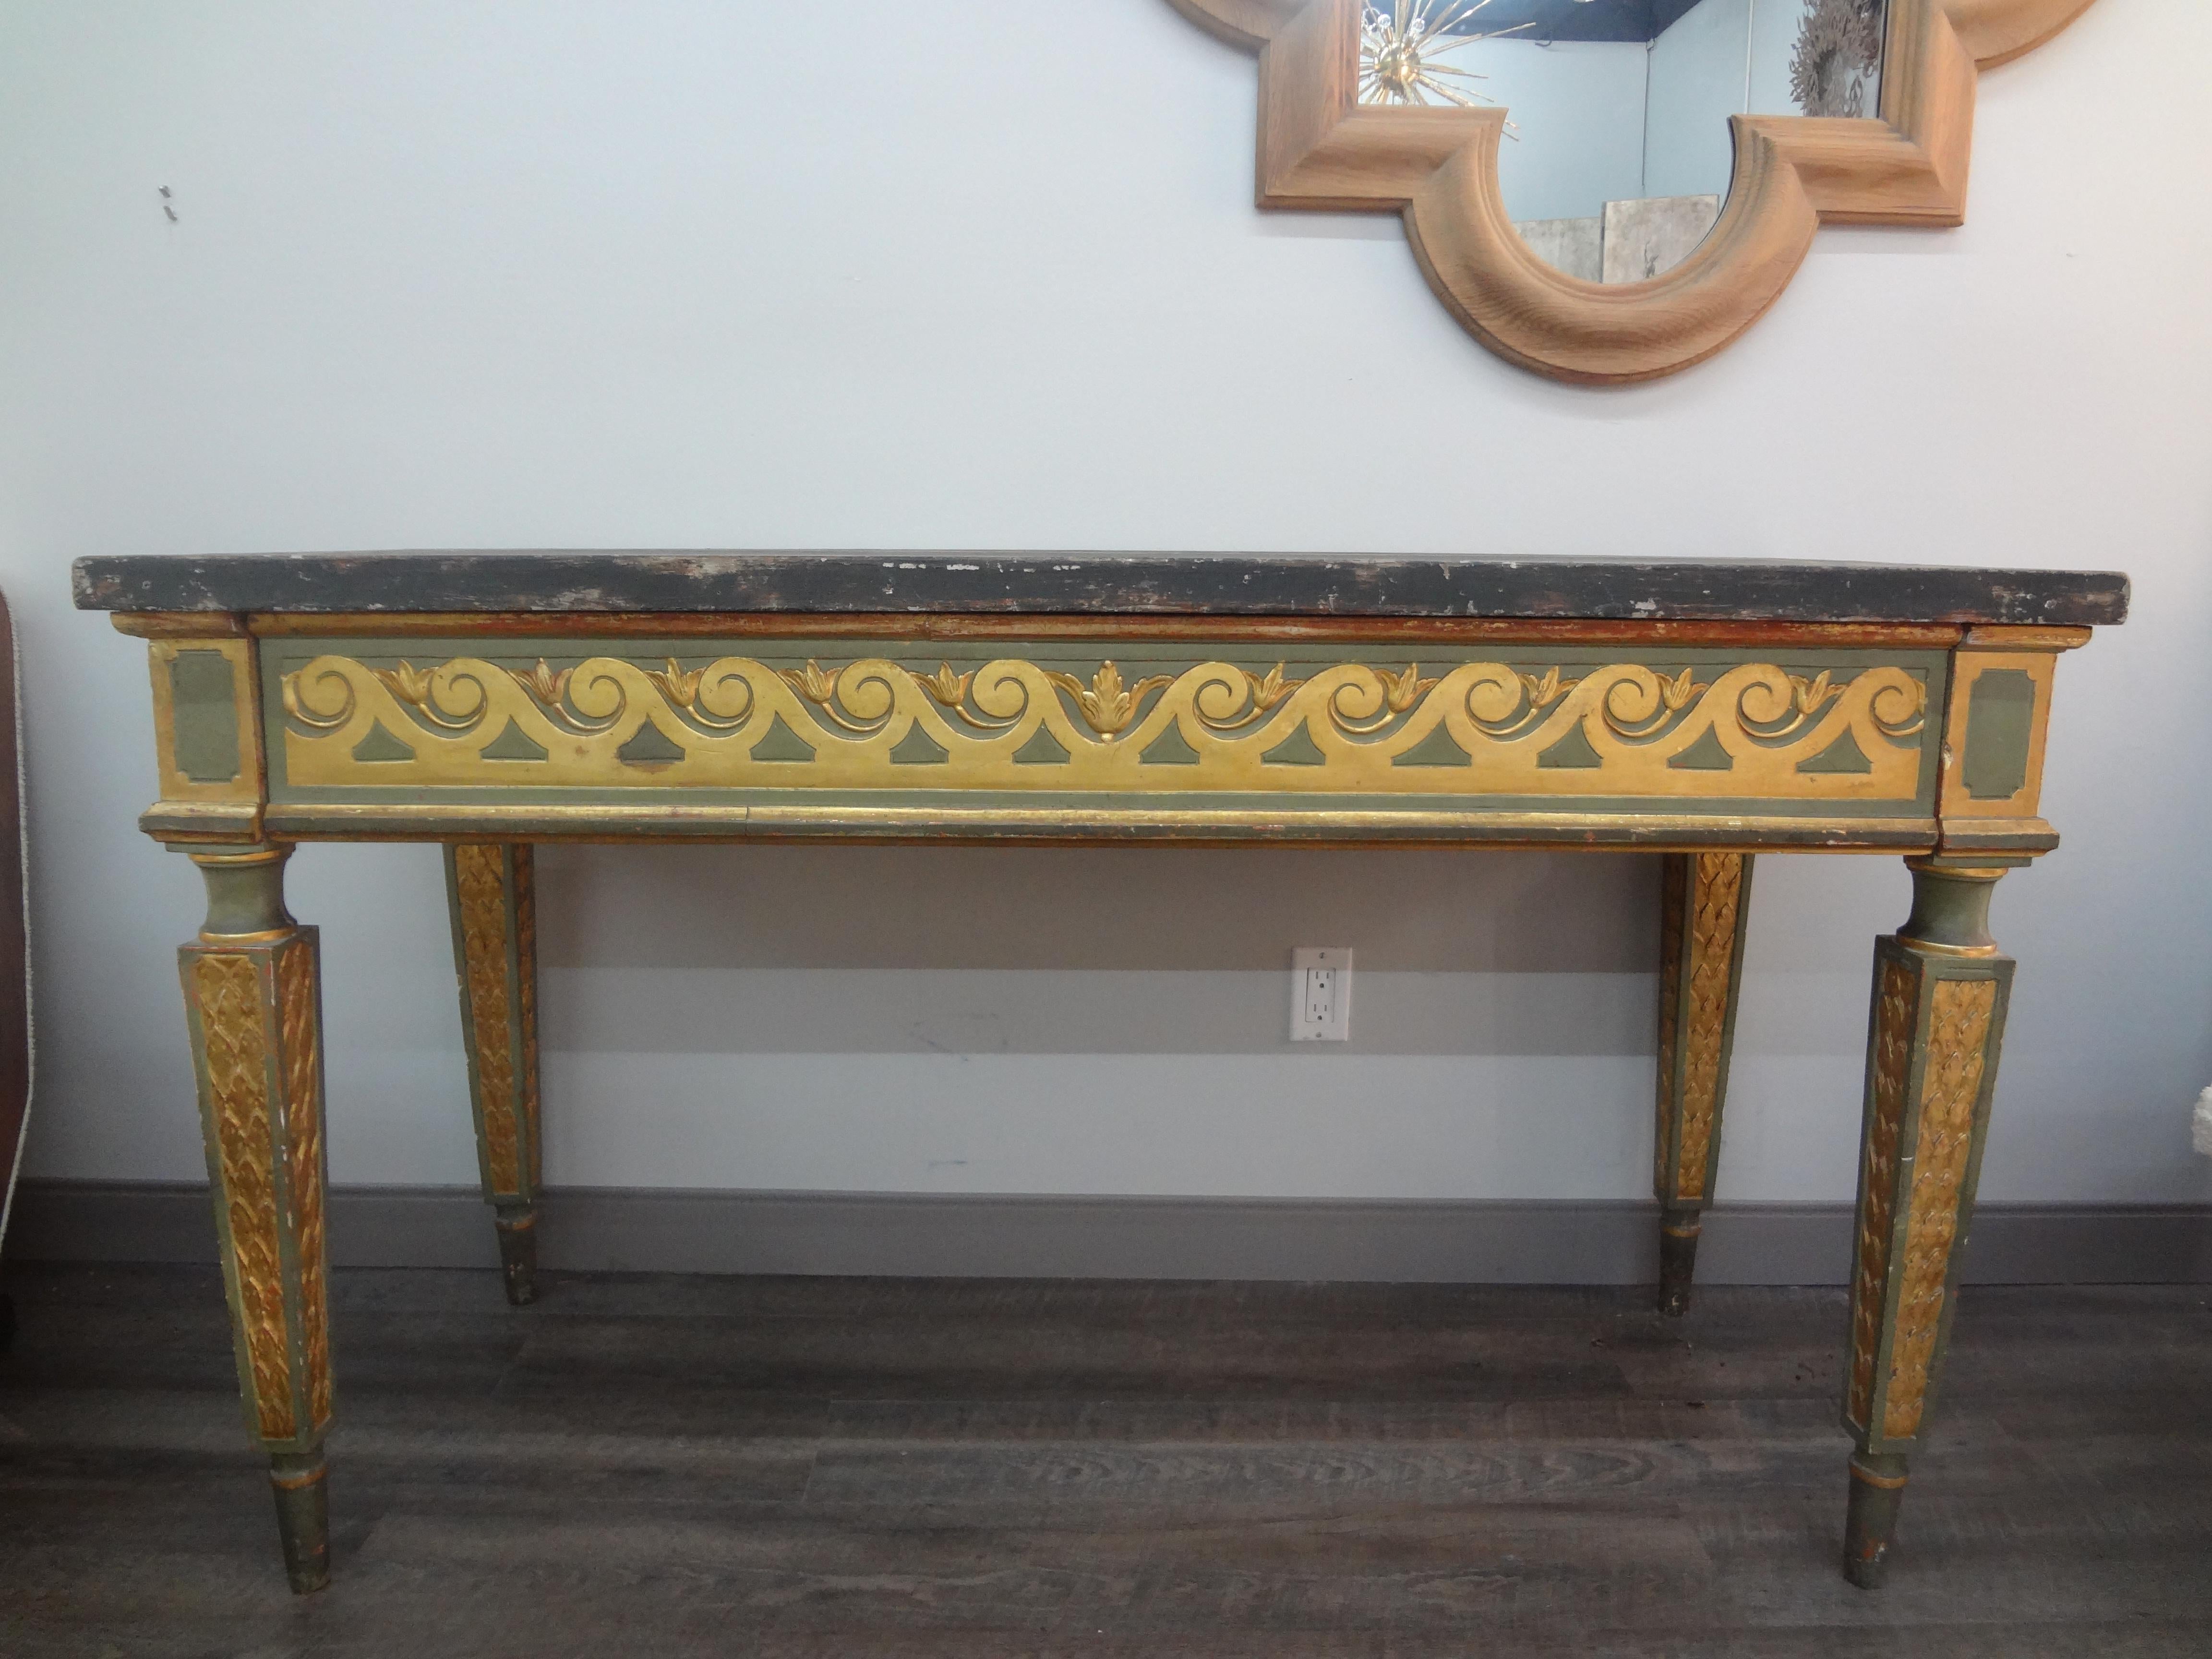 19th Century Italian Louis XVI Style Painted And Parcel Gilt Console Table.
Our large antique Italian Neoclassical style painted and giltwood console table has a painted finish with a lovely wave design in gilt on three sides with a single drawer